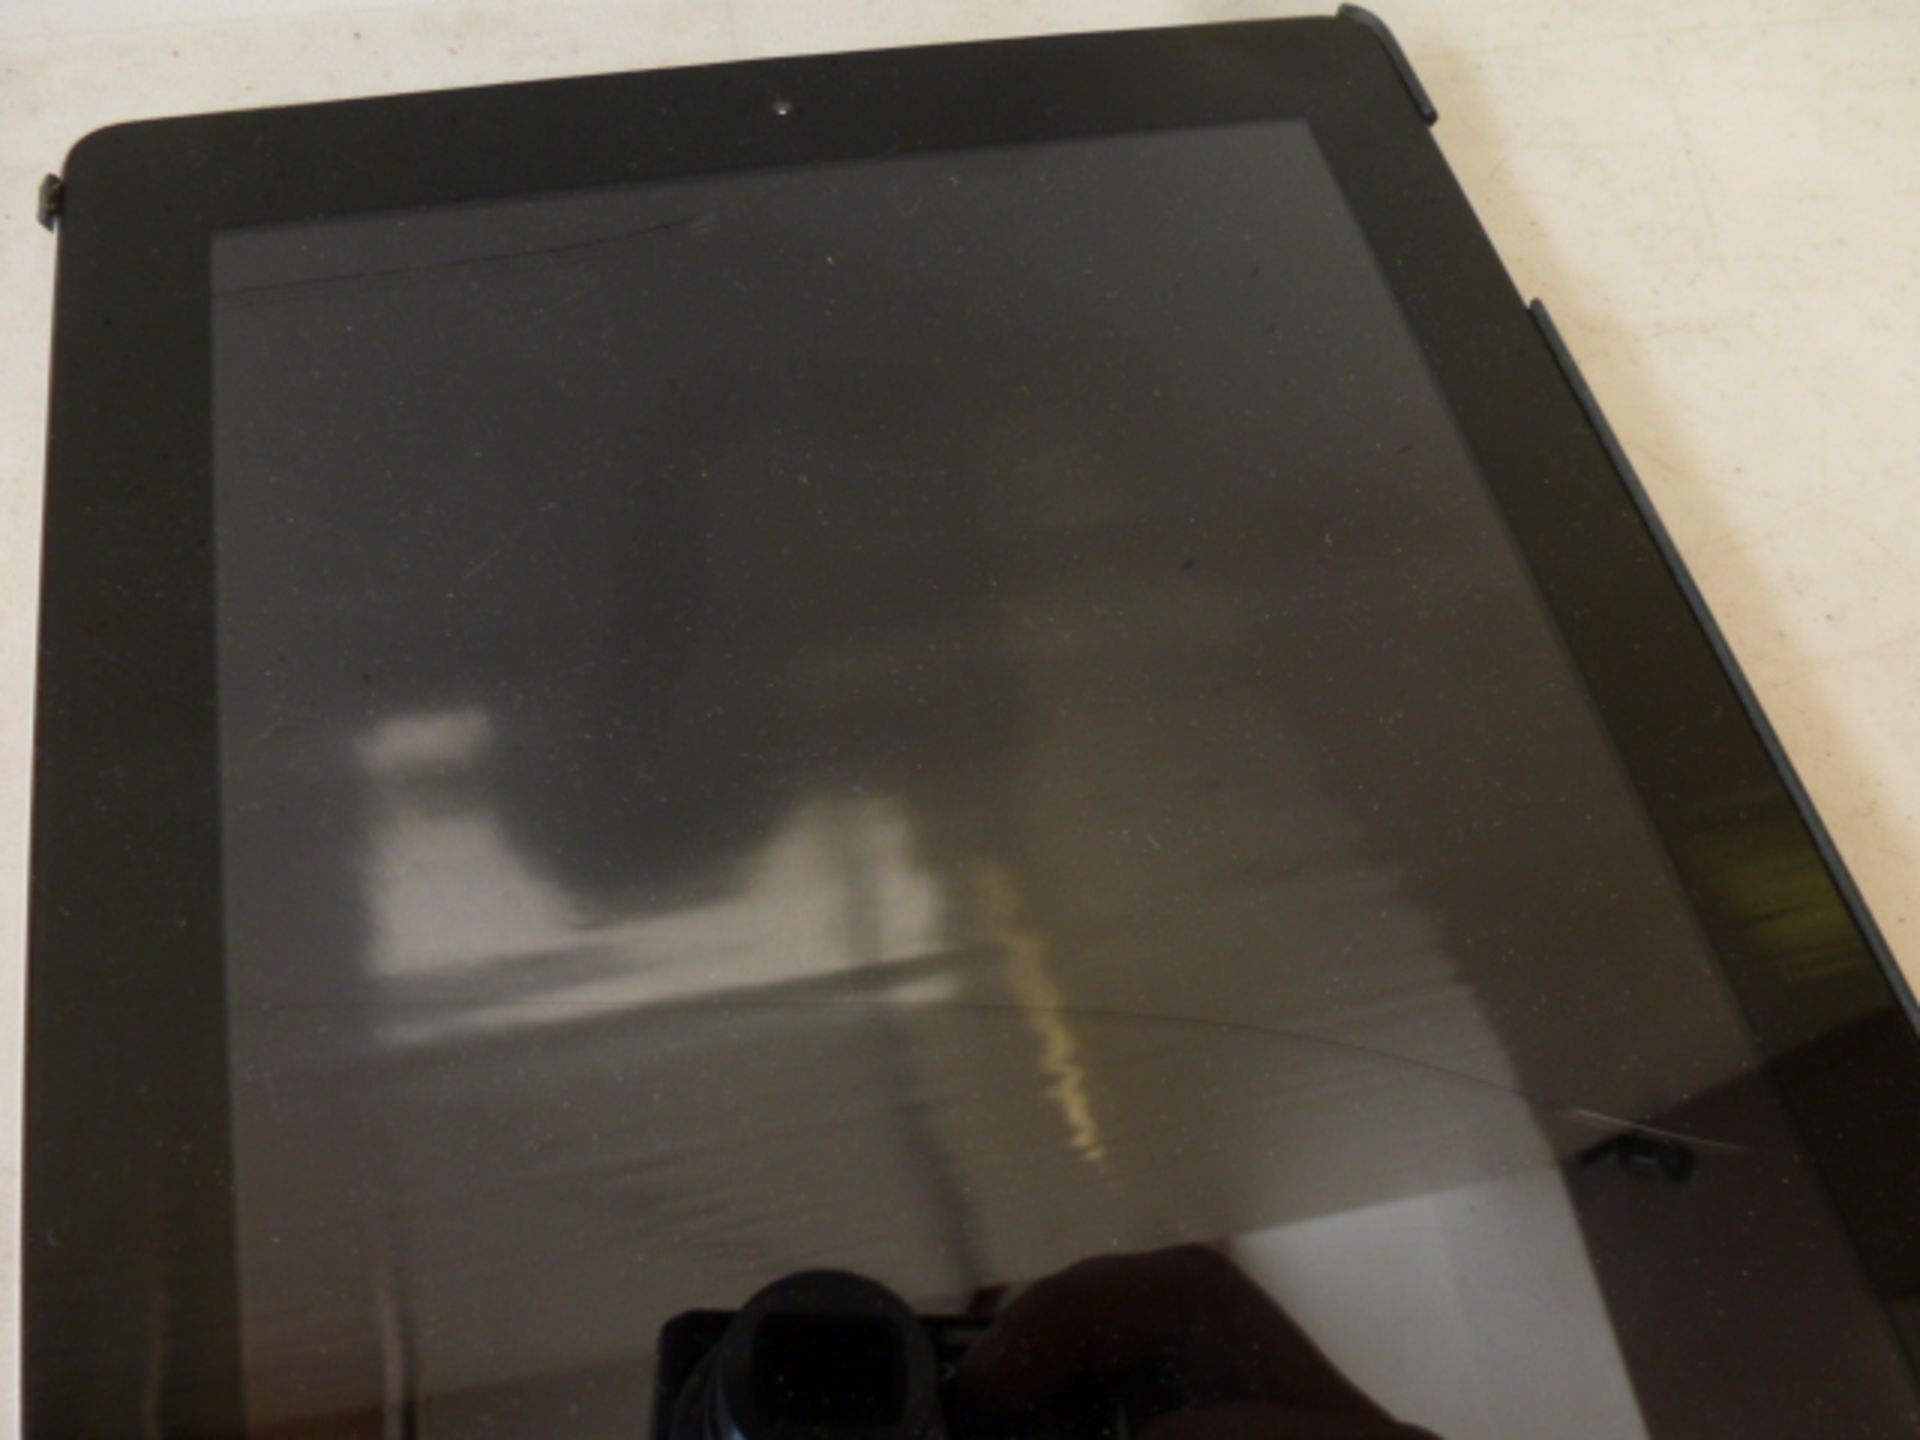 Ipad 2 Model A1396, Wi-Fi 3G, 32GB. Comes with Box & Charger. (Slight Damage to Screen as Viewed/ - Image 4 of 4